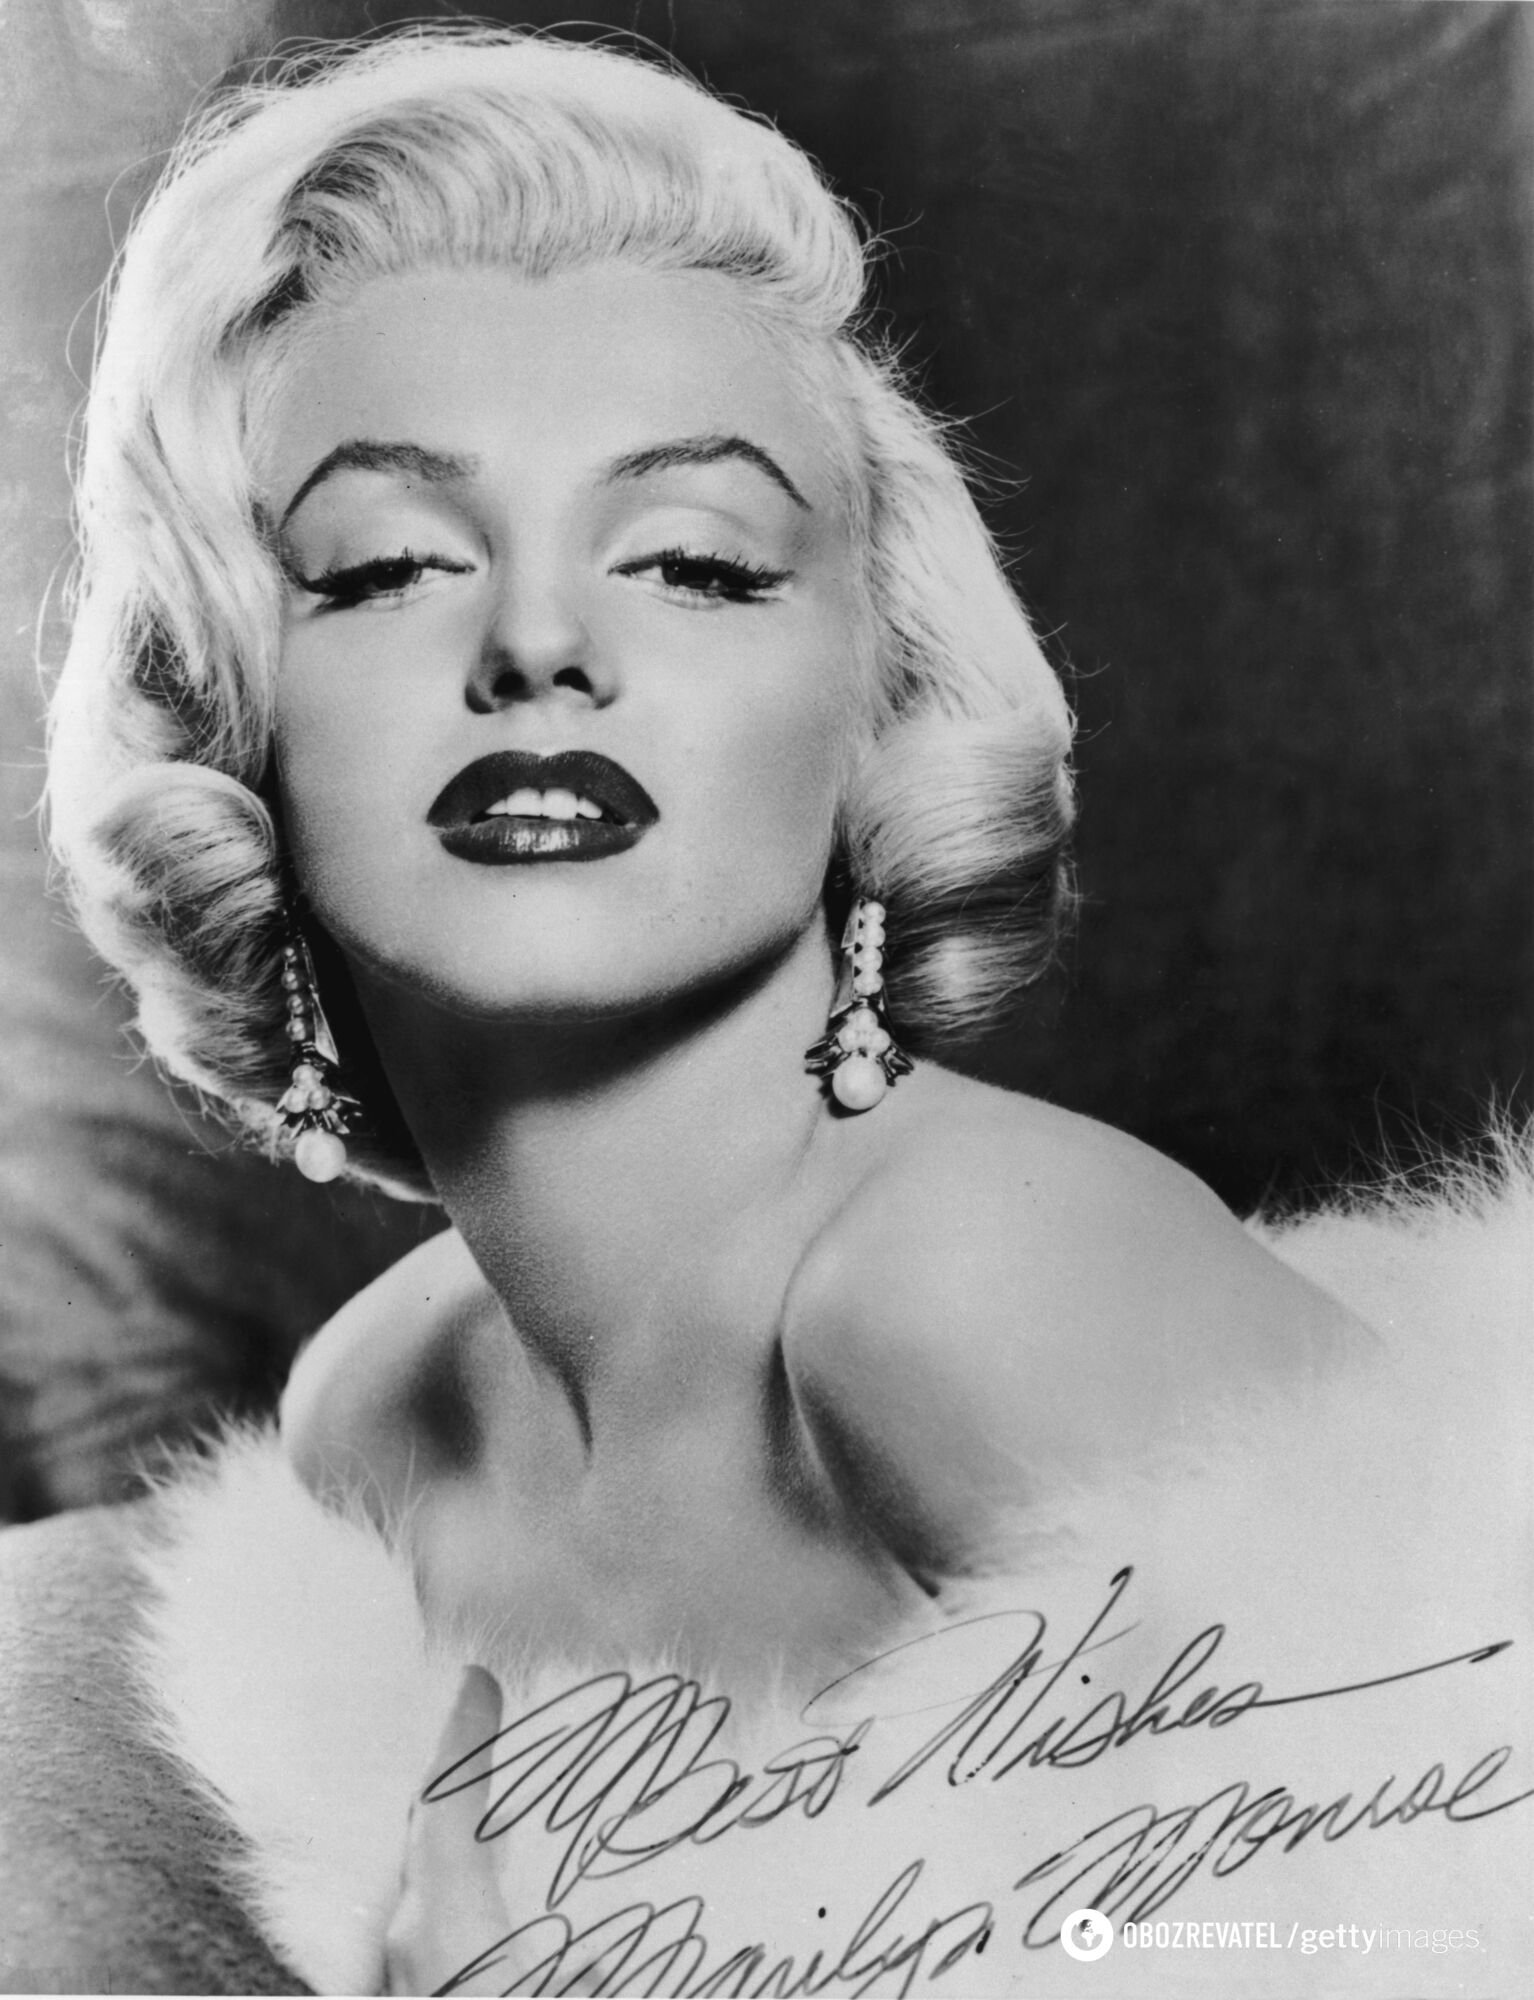 Lesia Nikitiuk dressed as Marilyn Monroe: what are the secrets of success and seduction of the most famous blonde and sex symbol of the 1950s